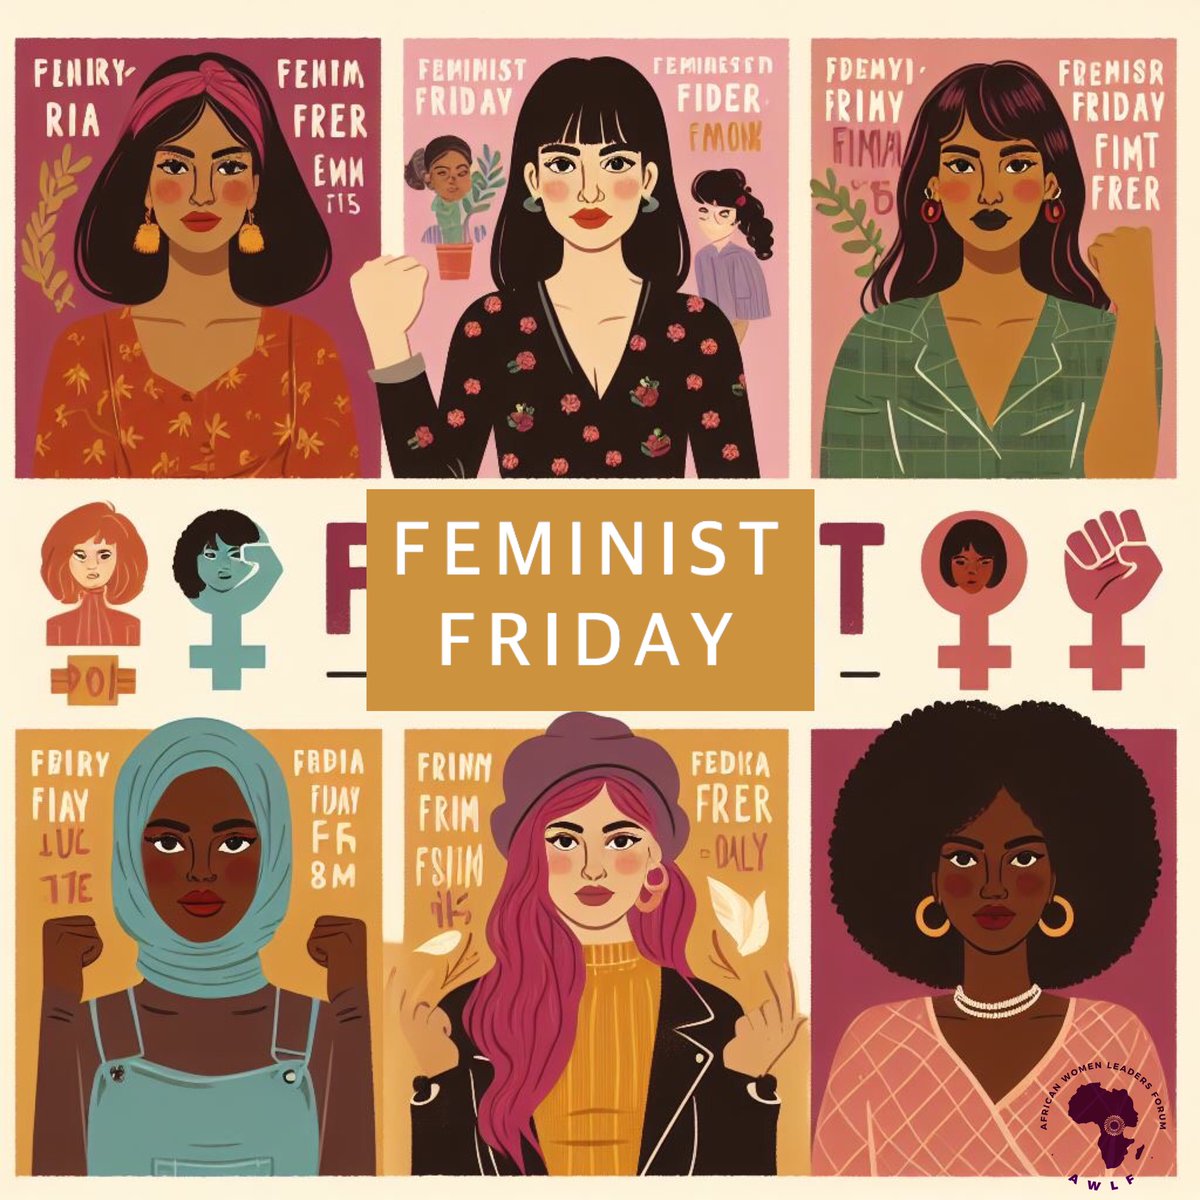 Feminism and diversity are crucial for creating a more equitable & just society. Diversity within feminism is important because it acknowledges the varied experiences & identities of women. #feministfriday #feminism #diversity @FeministsKE @FEAM_Malawi @glanyline @DAWNfeminist